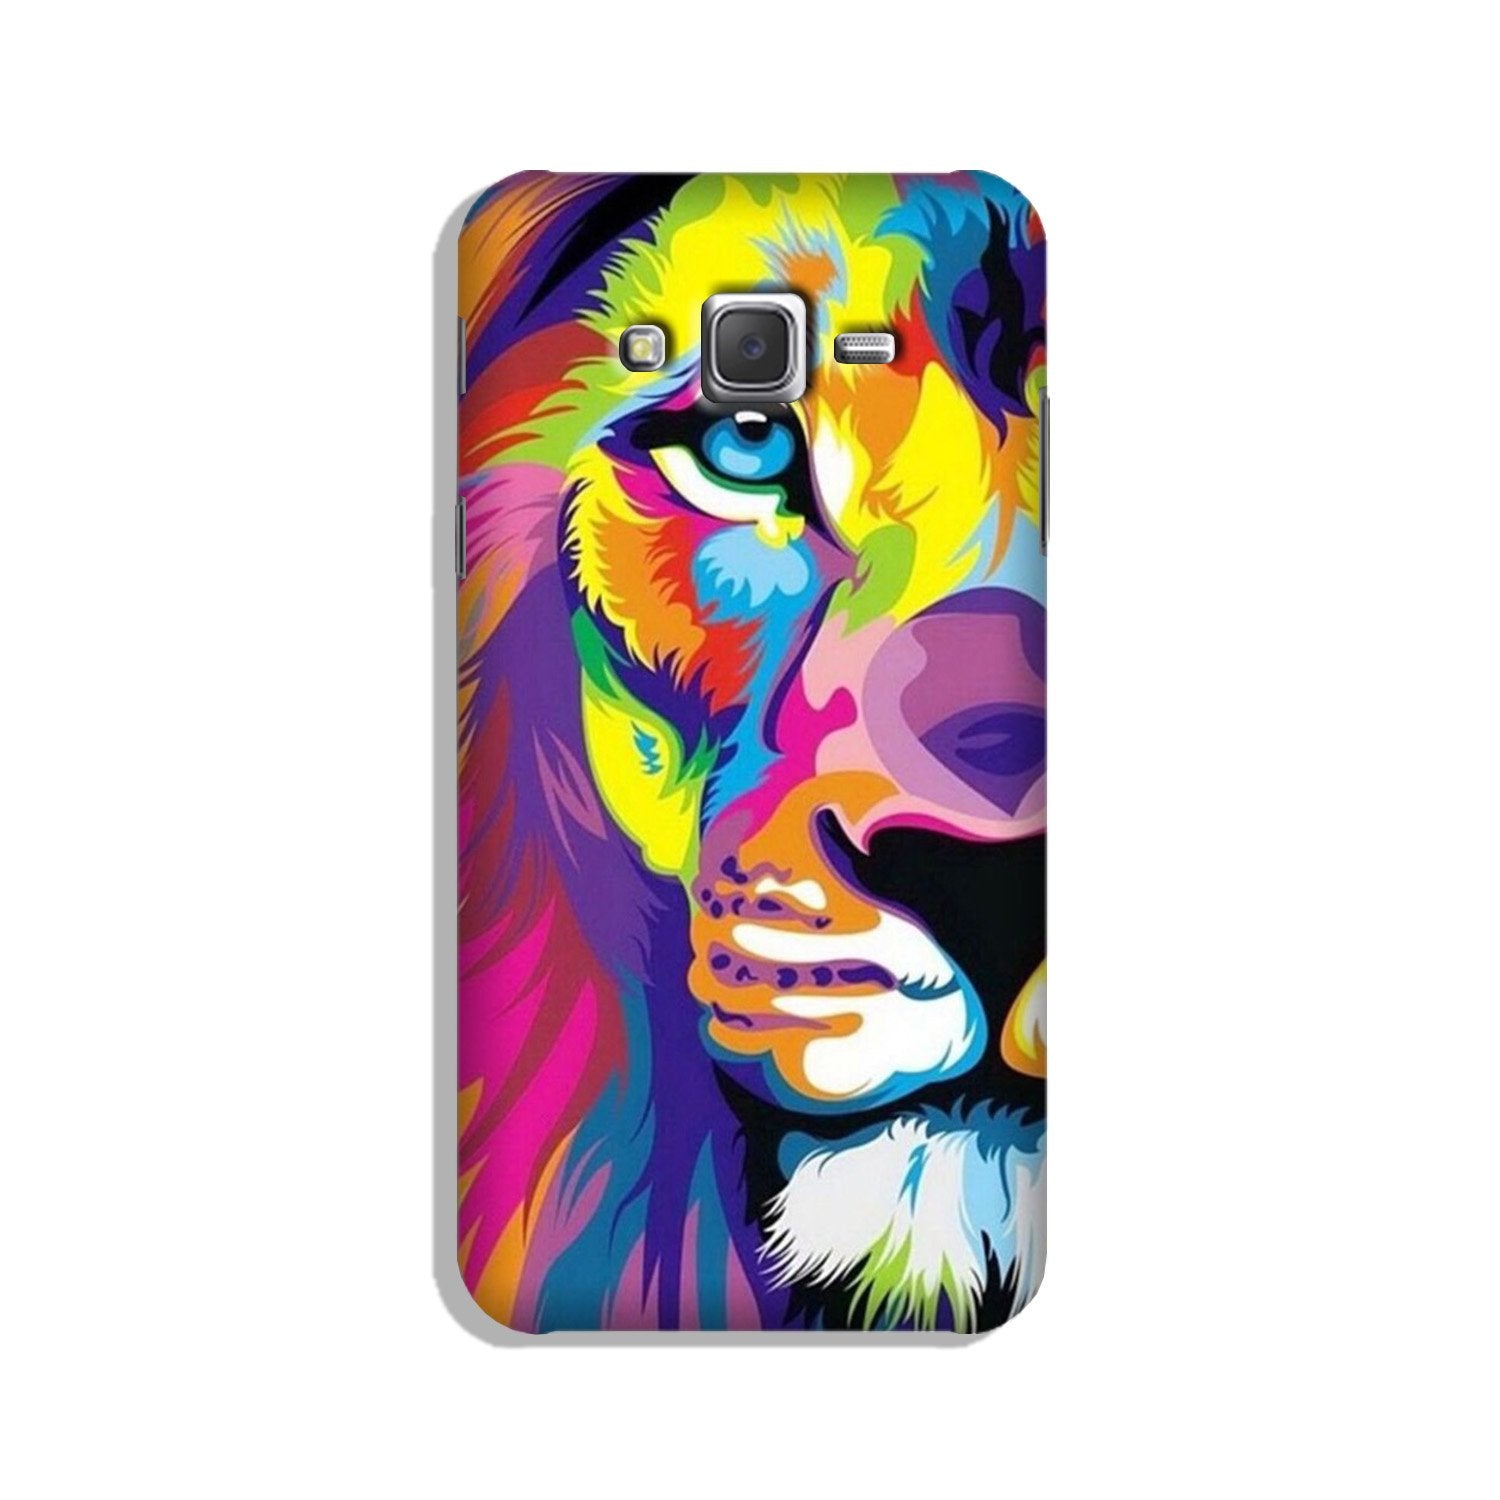 Colorful Lion Case for Galaxy J7 Nxt  (Design - 110)